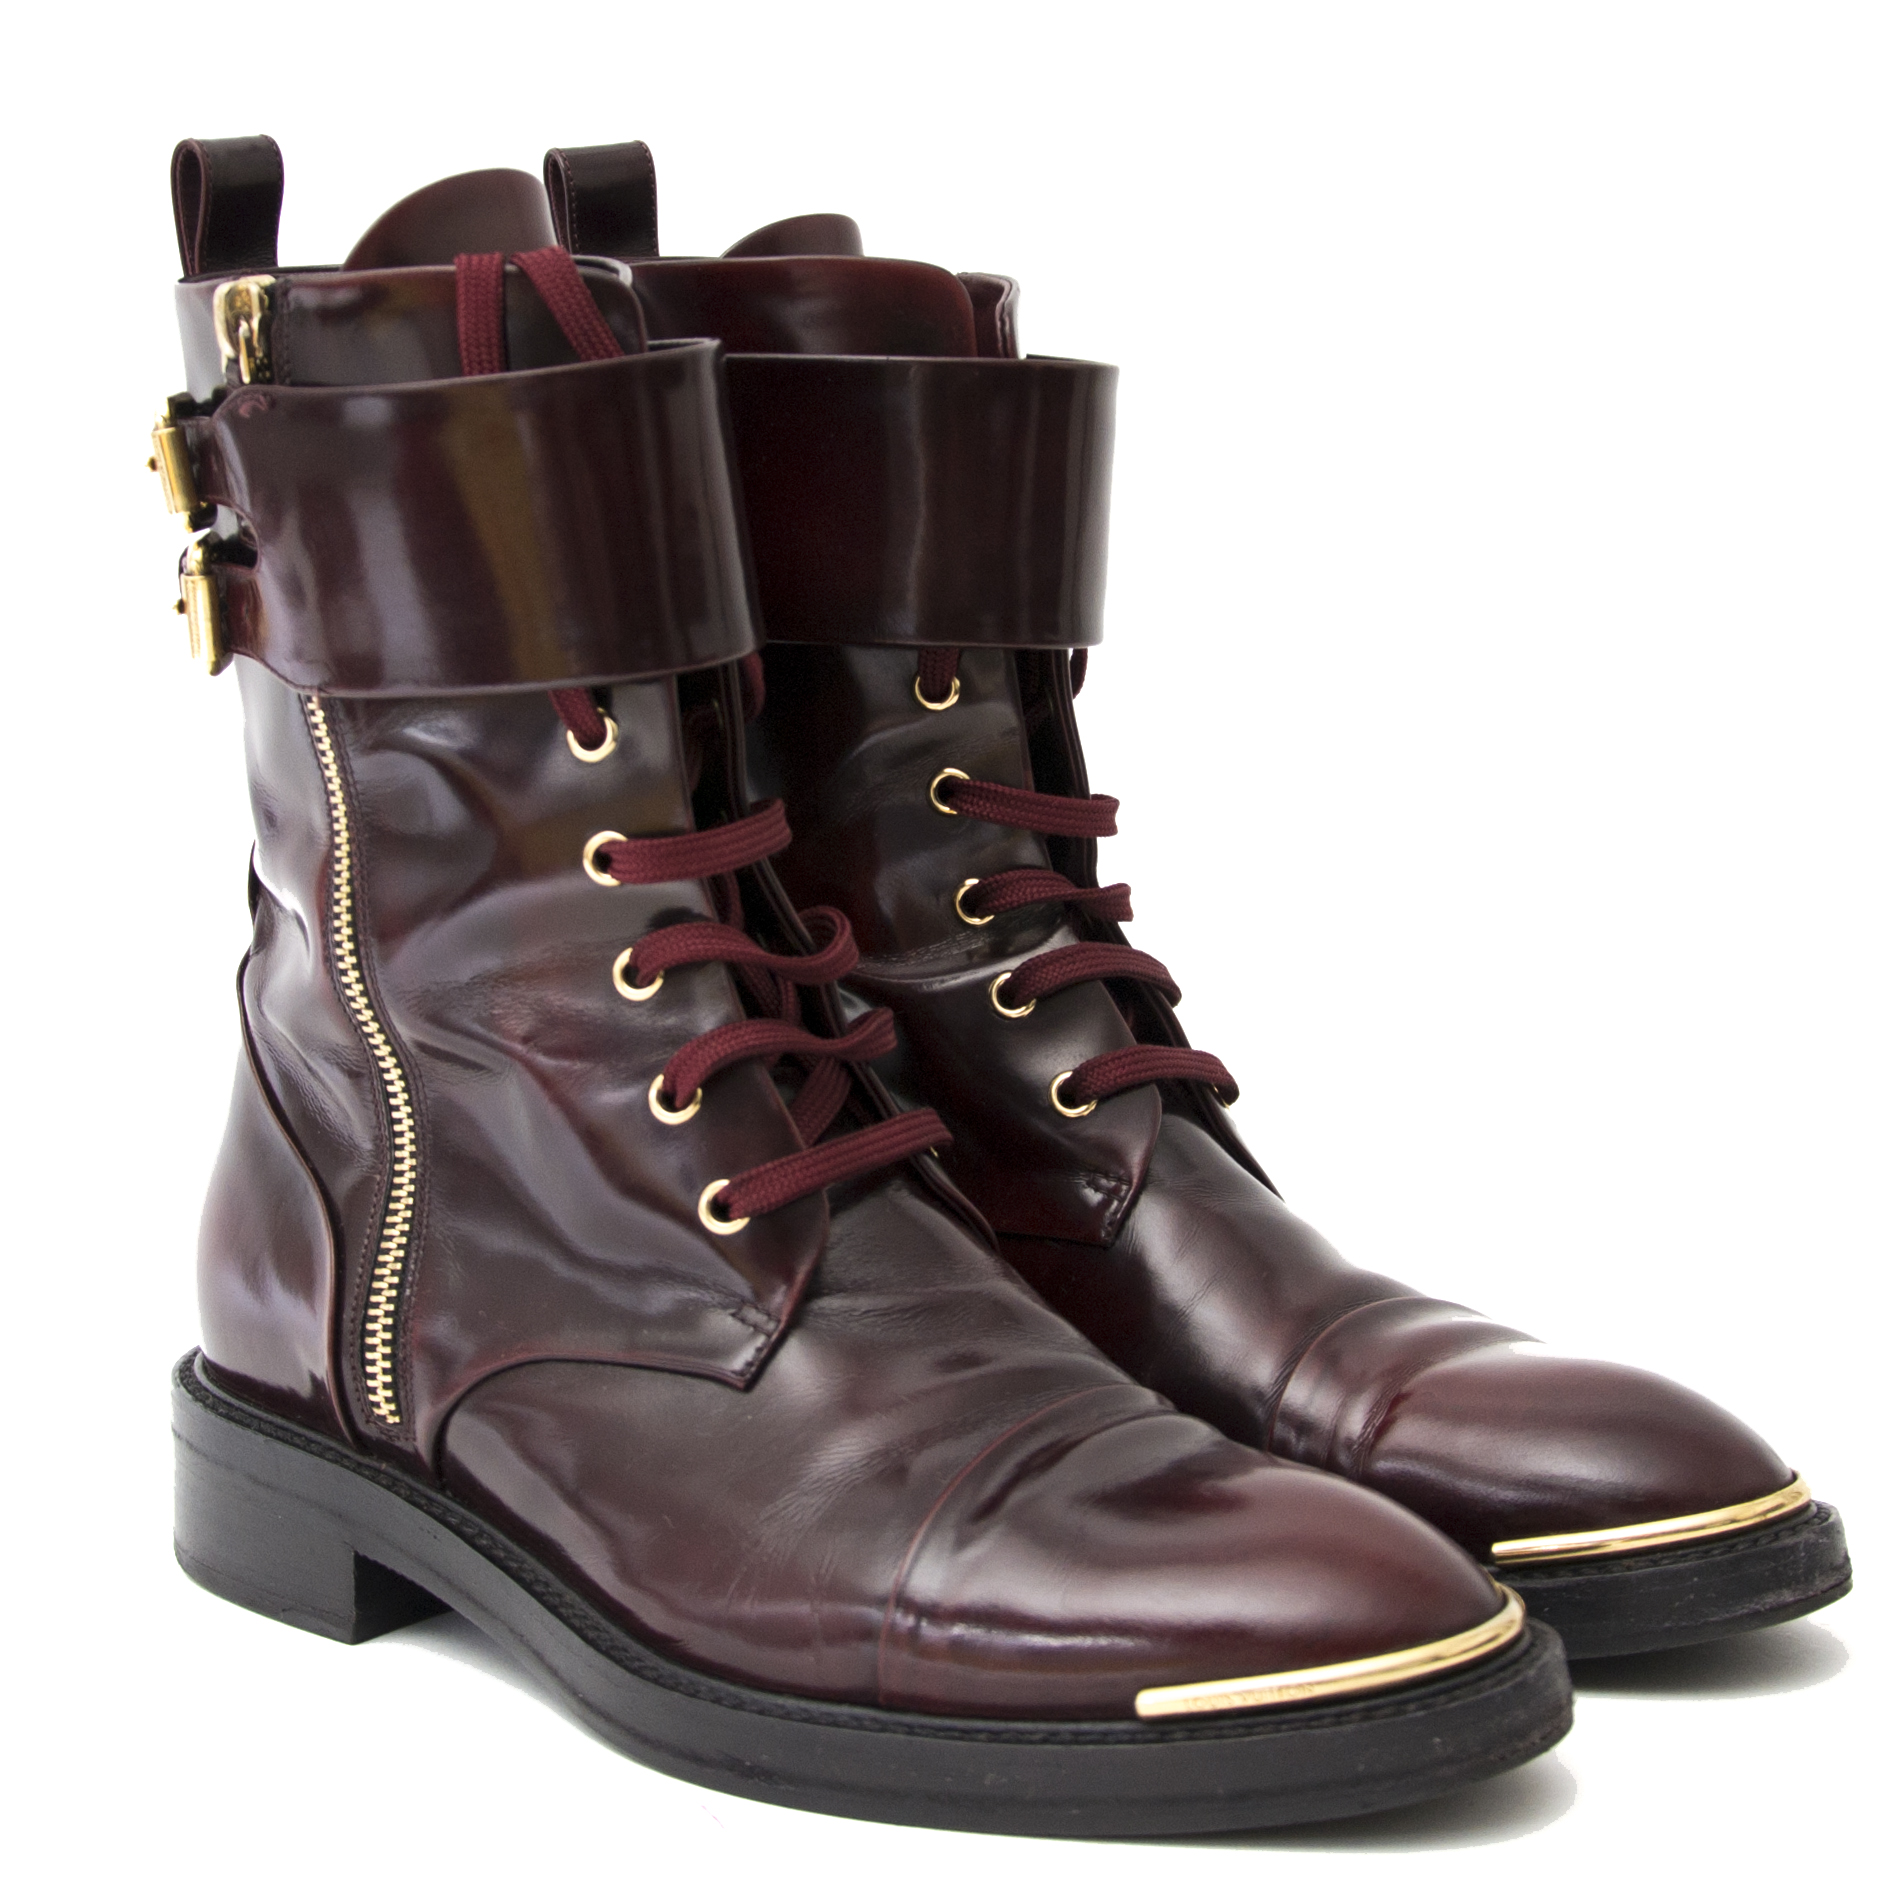 Louis Vuitton Burgundy Leather Diplomacy Ranger Boots Size 38 at